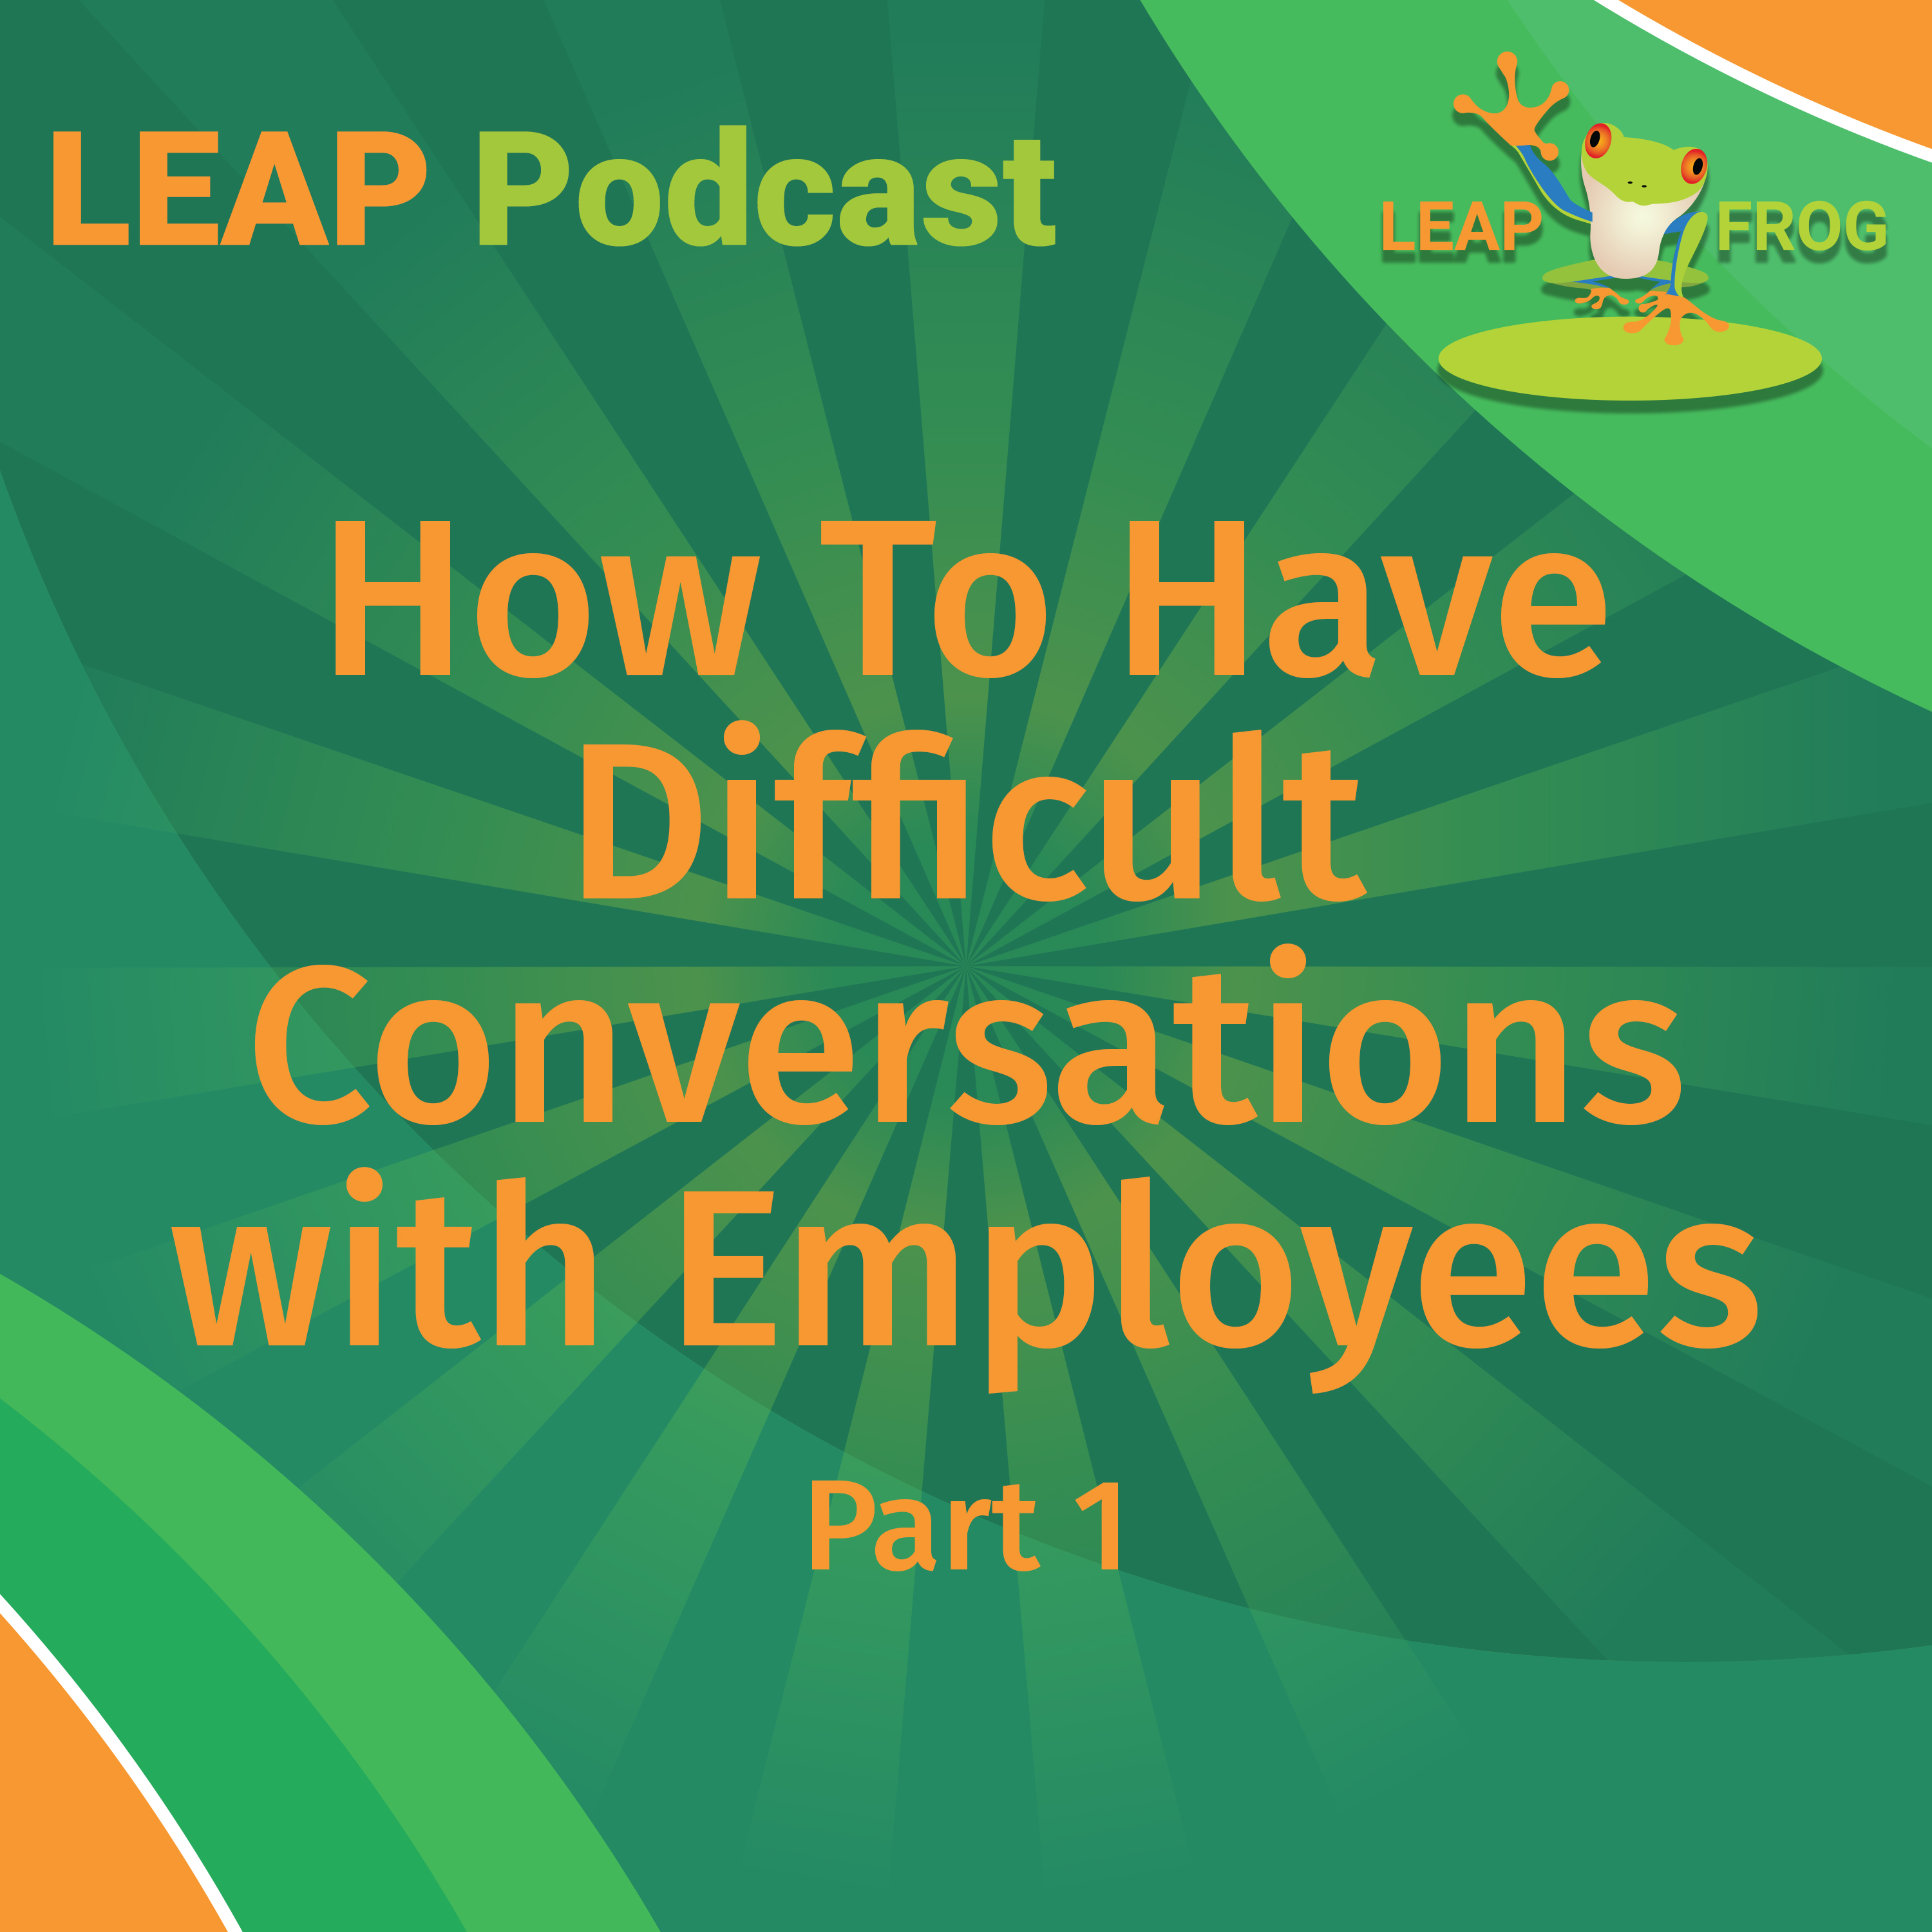 LEAP Podcast How To Have Difficult Conversations with Employees, Part 1 episode cover art